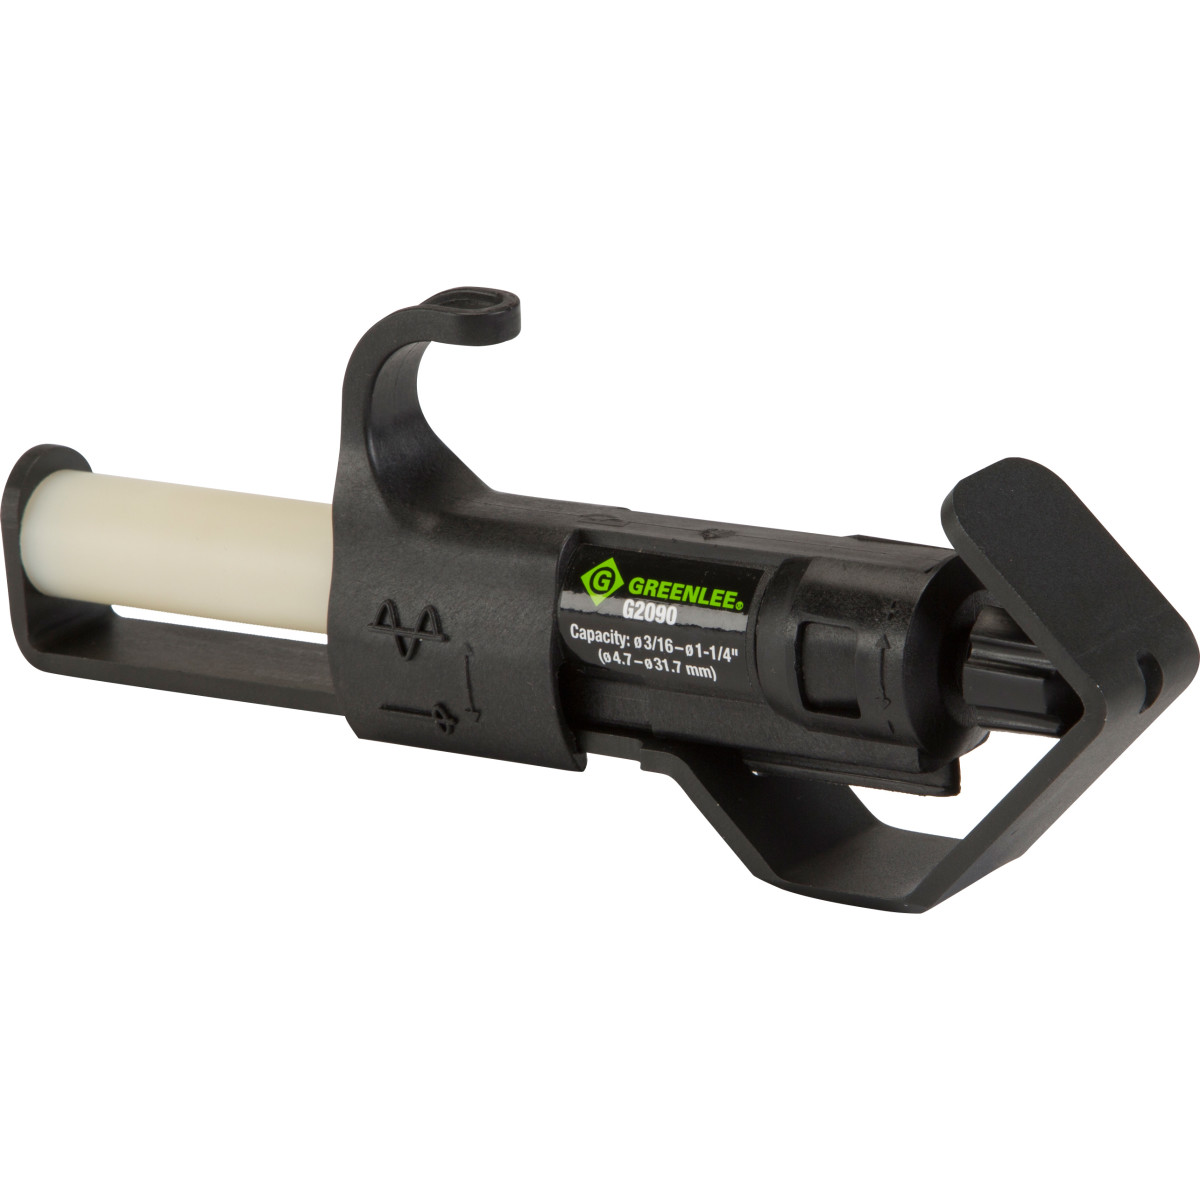 Adjustable Cable Stripping Tool.  Intuitive Blade Design allowing for user to maintain contact with the cable at all times.  Ergonomic jaw plunger.  Cable jacket lifting edge.  Safety factor – Replaces the need to use blades when stripping cable.  Blade lacerations comprise approximately 40 percent of all recordable injuries on the jobsite.